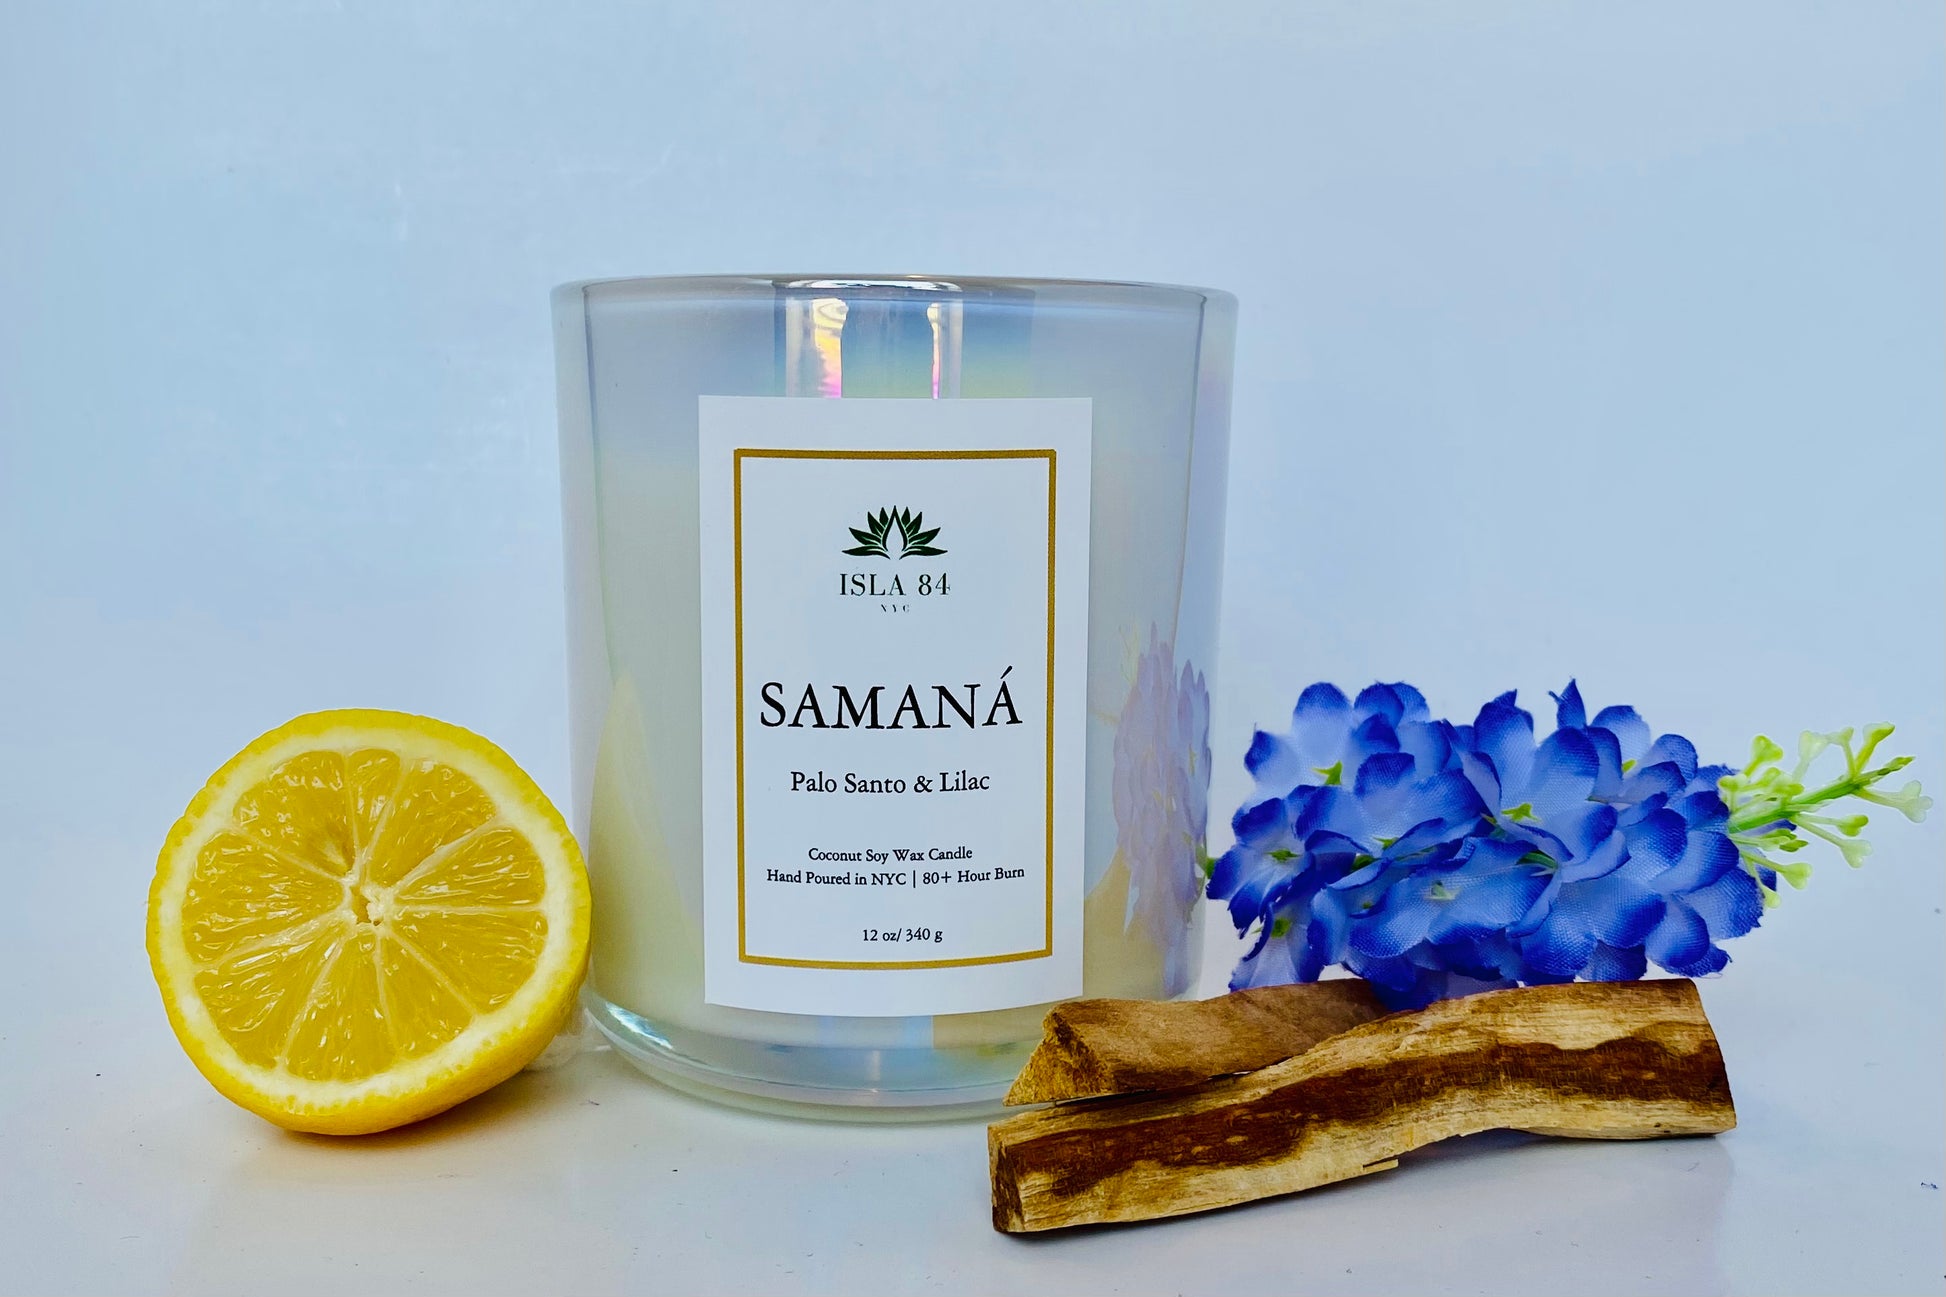 Samana Signature Scented Candle; Palo Santo & Lilac Candle; Coconut Soy Wax Candle with Wood Wick; Latino Candles; Dominican Candles; DR Candles. Lemon, flowers, palo santo smudge sticks